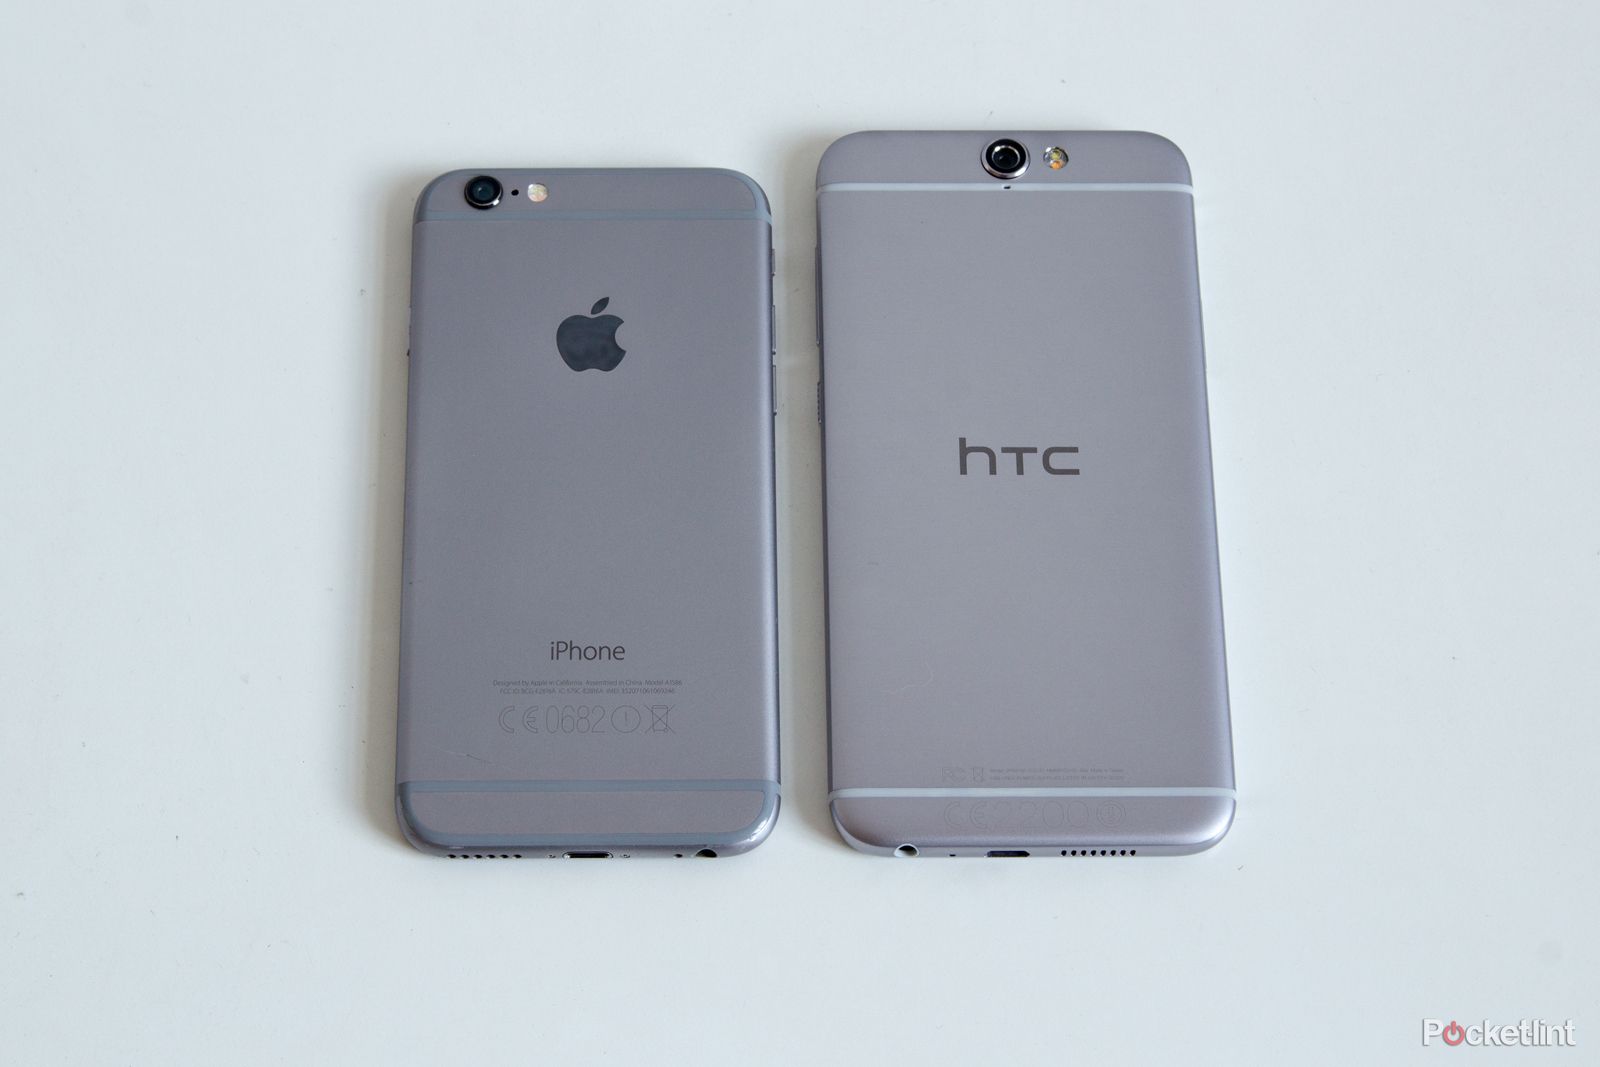 htc one a9 did htc just copy the iphone 6 design  image 1